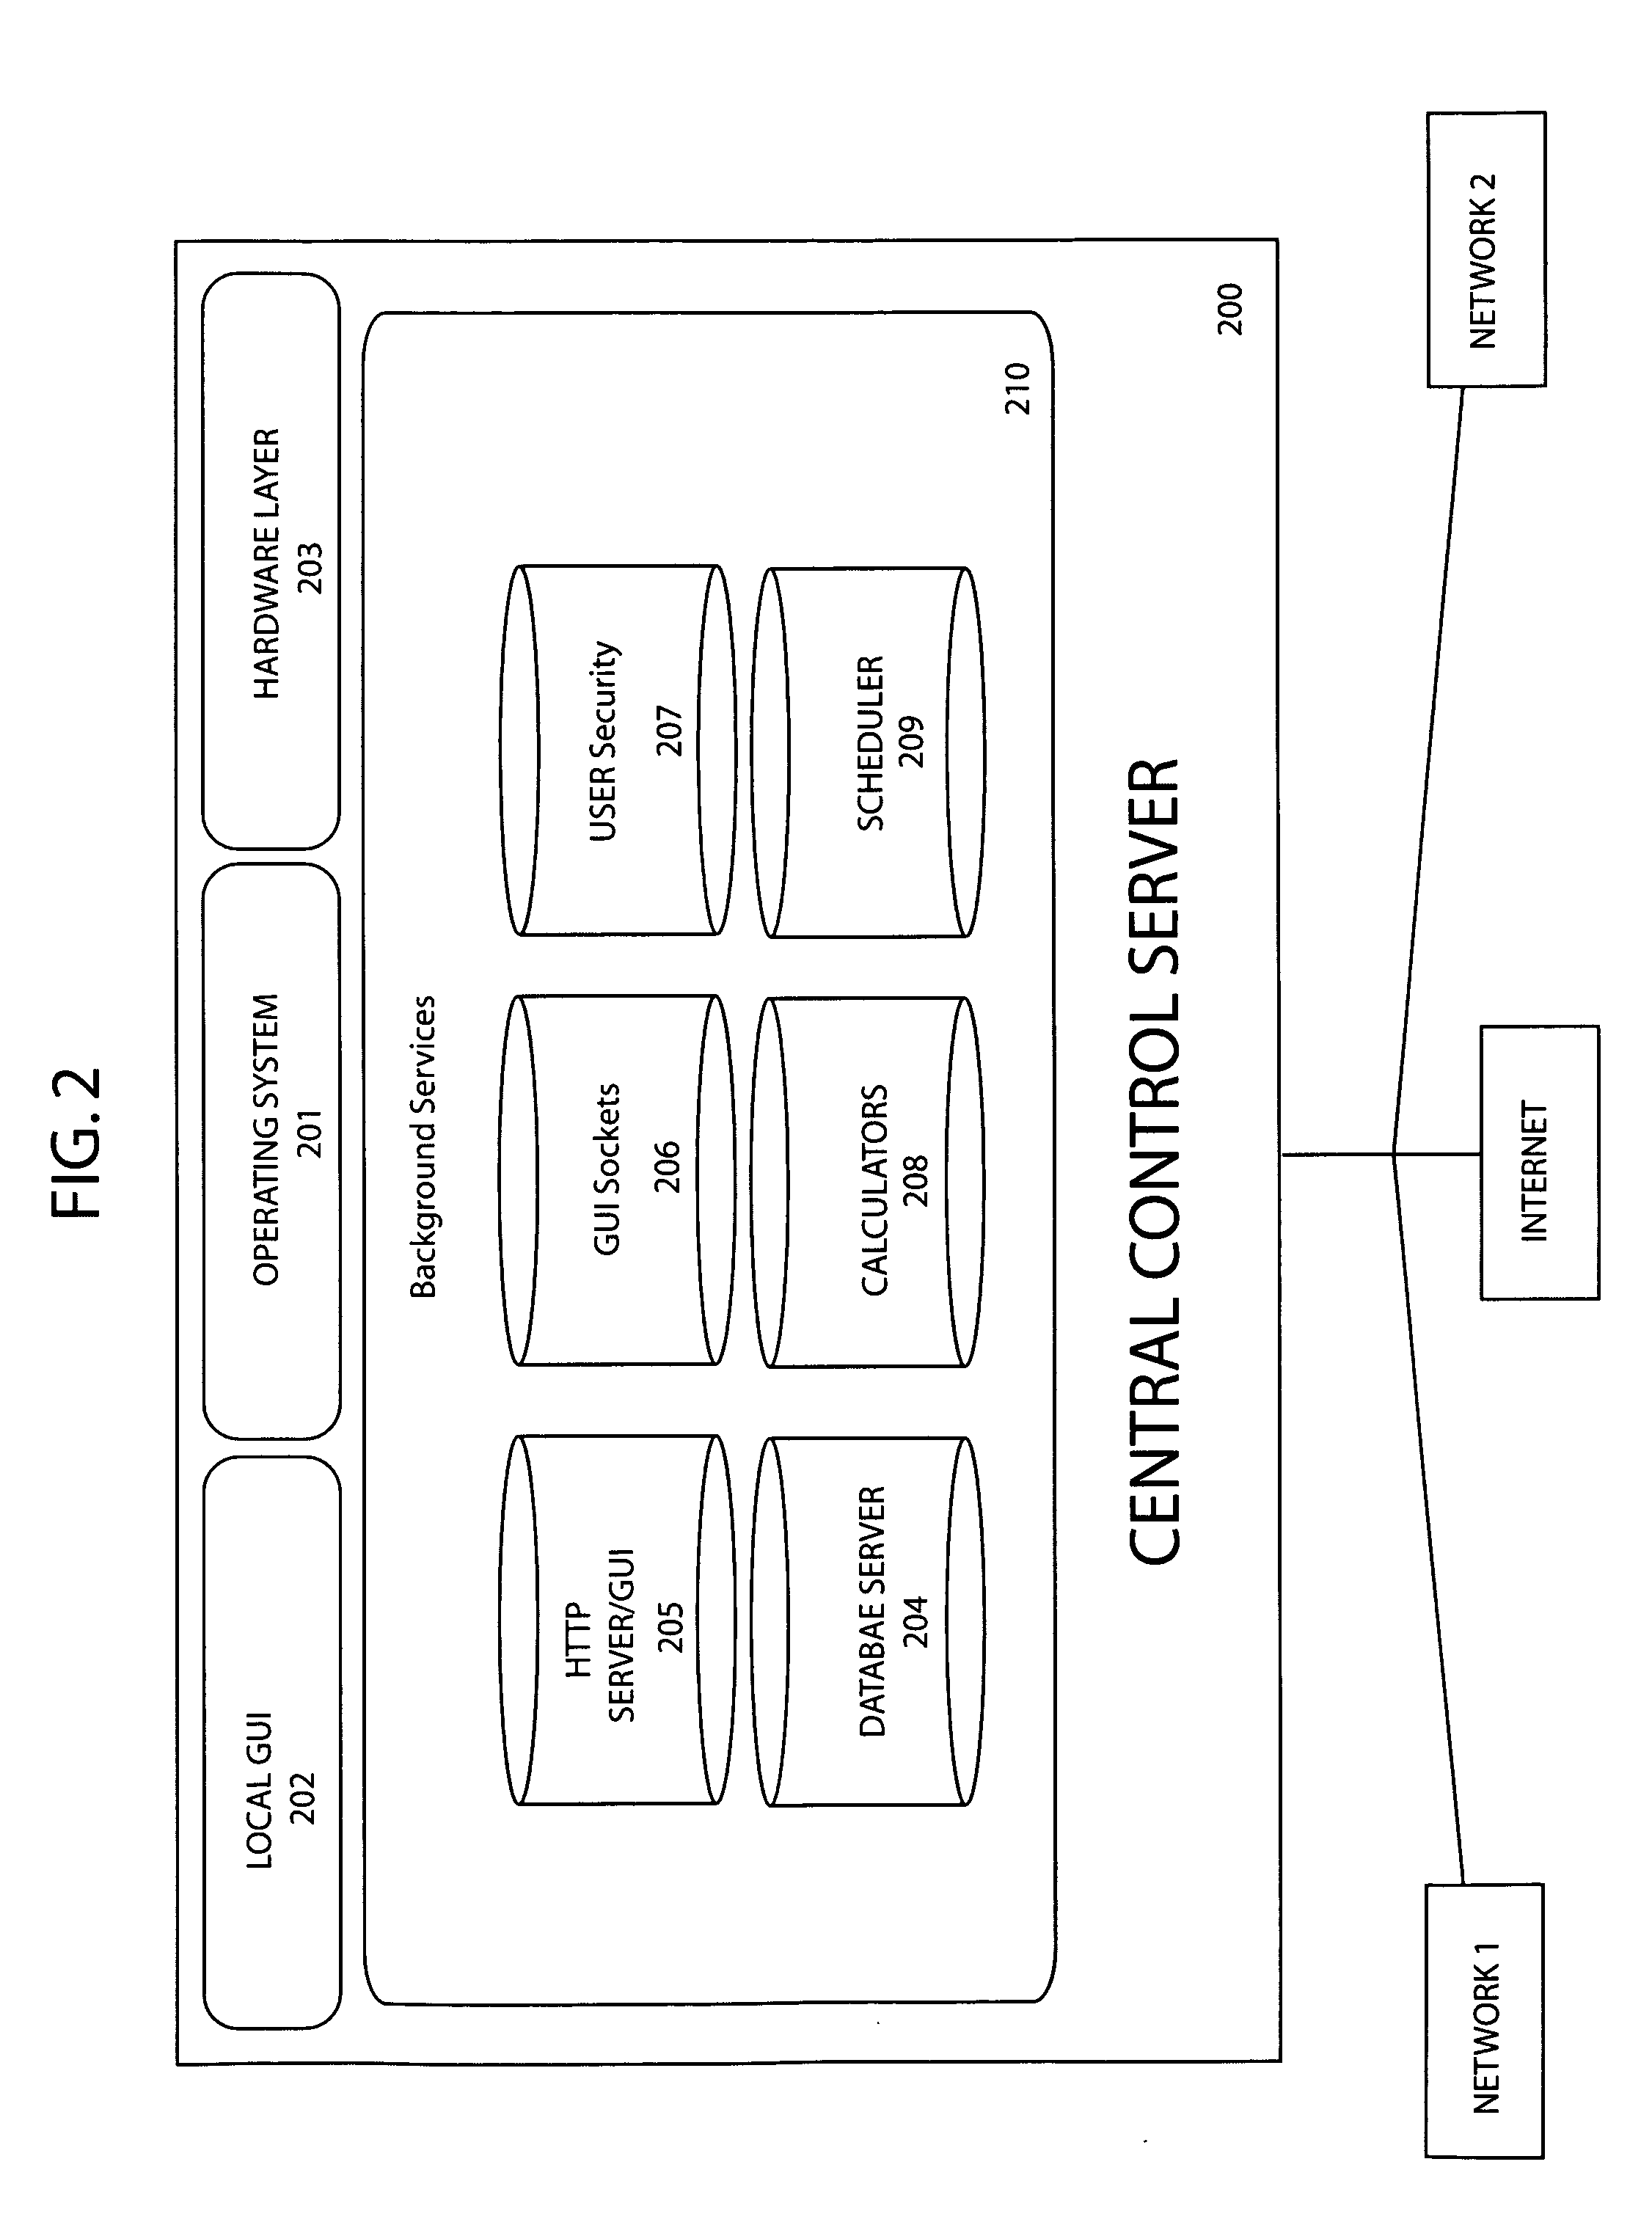 System and method for wireless irrigation utilizing a centralized control server and field module matrix